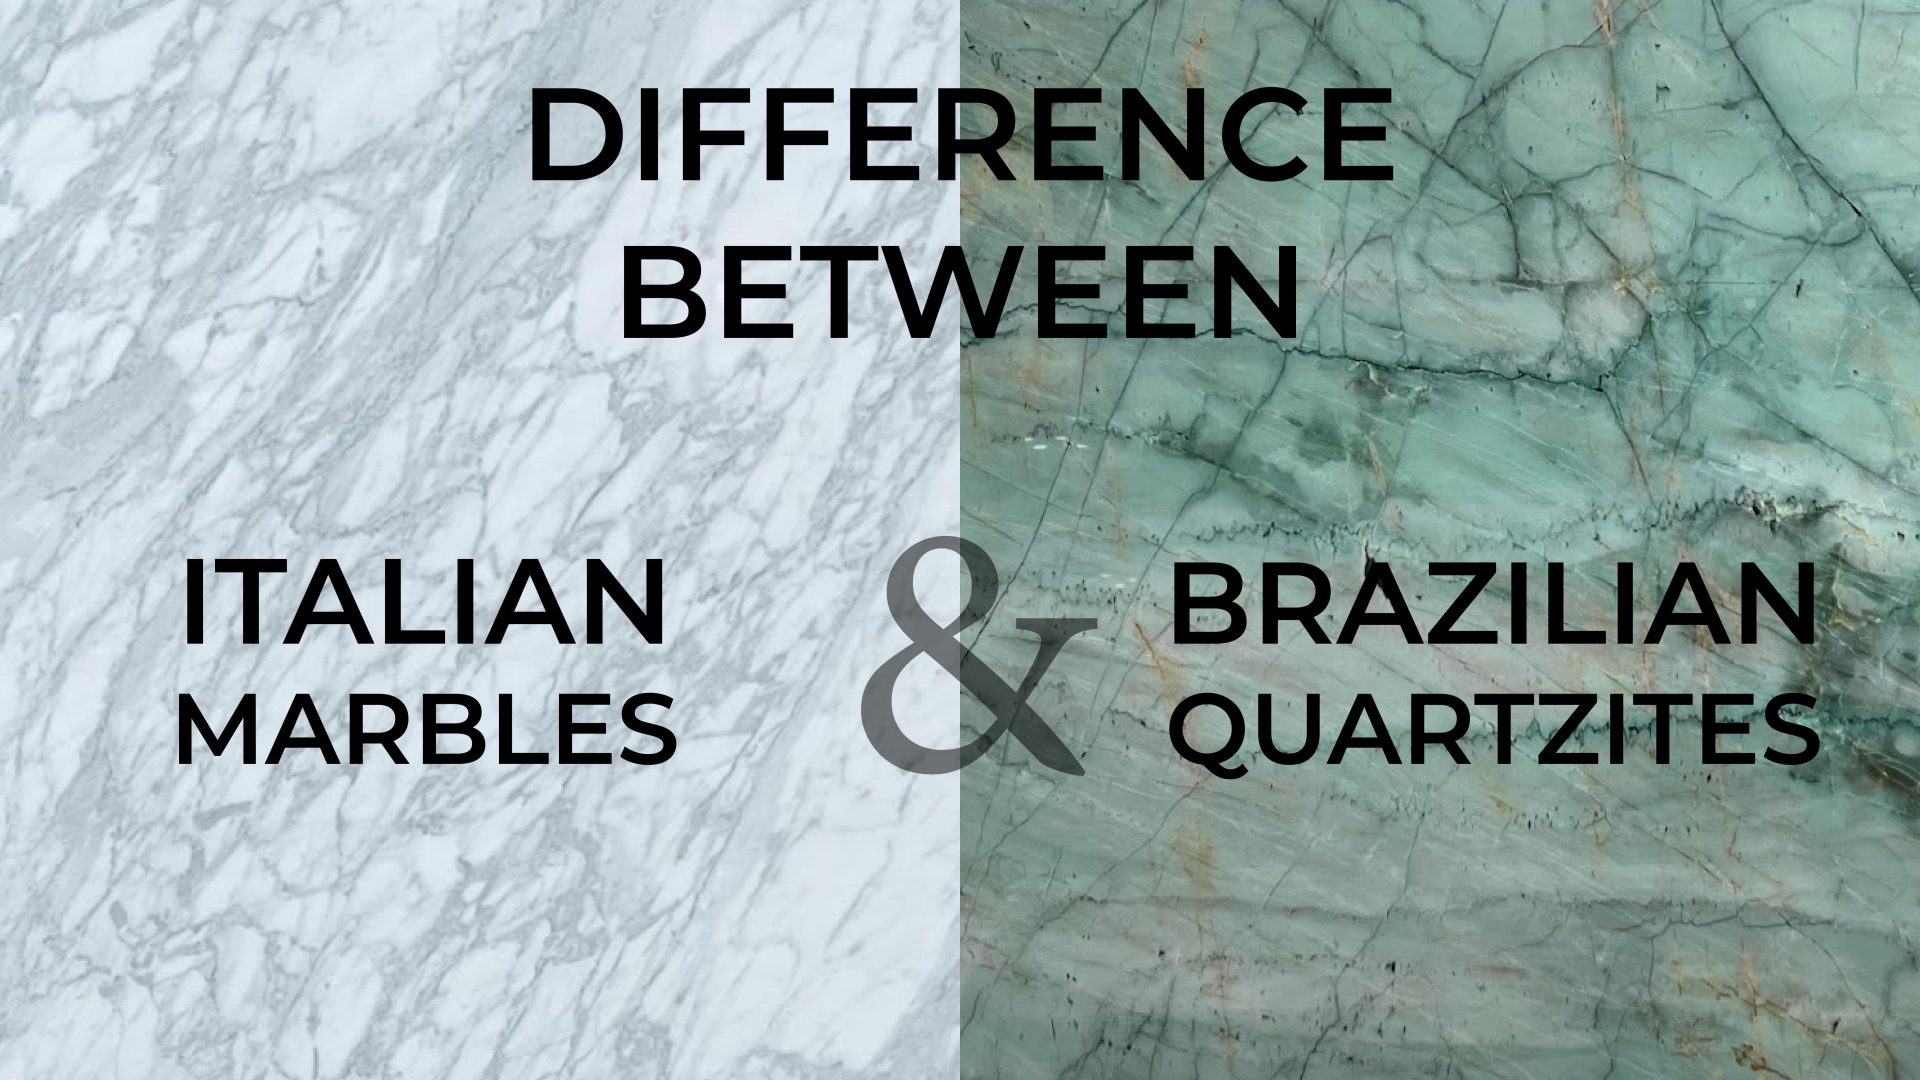 Difference between Italian marbles and Quartzites? 